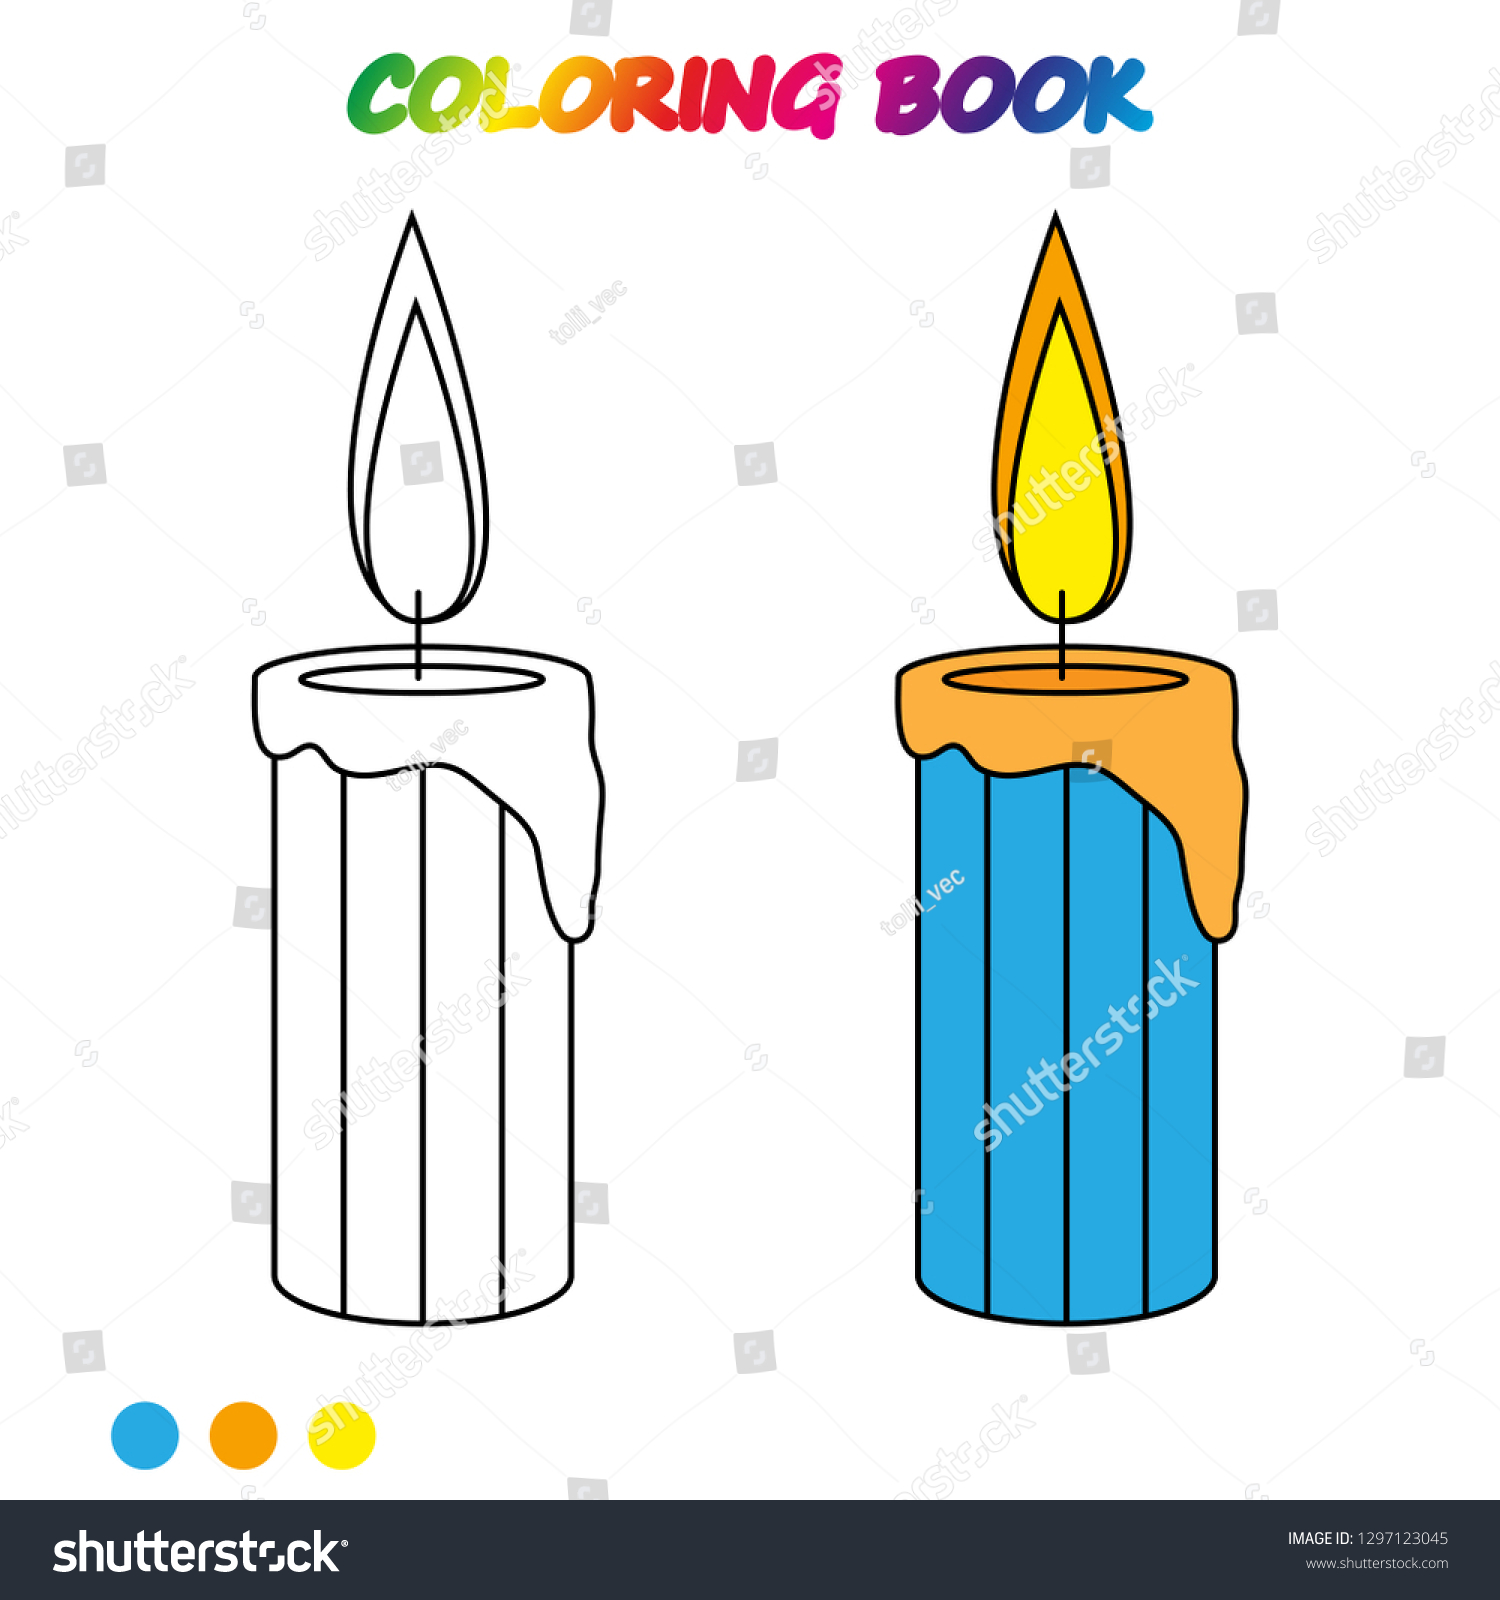 Coloring Book Candle Coloring Page Educate Stock Vector Royalty Free 1297123045